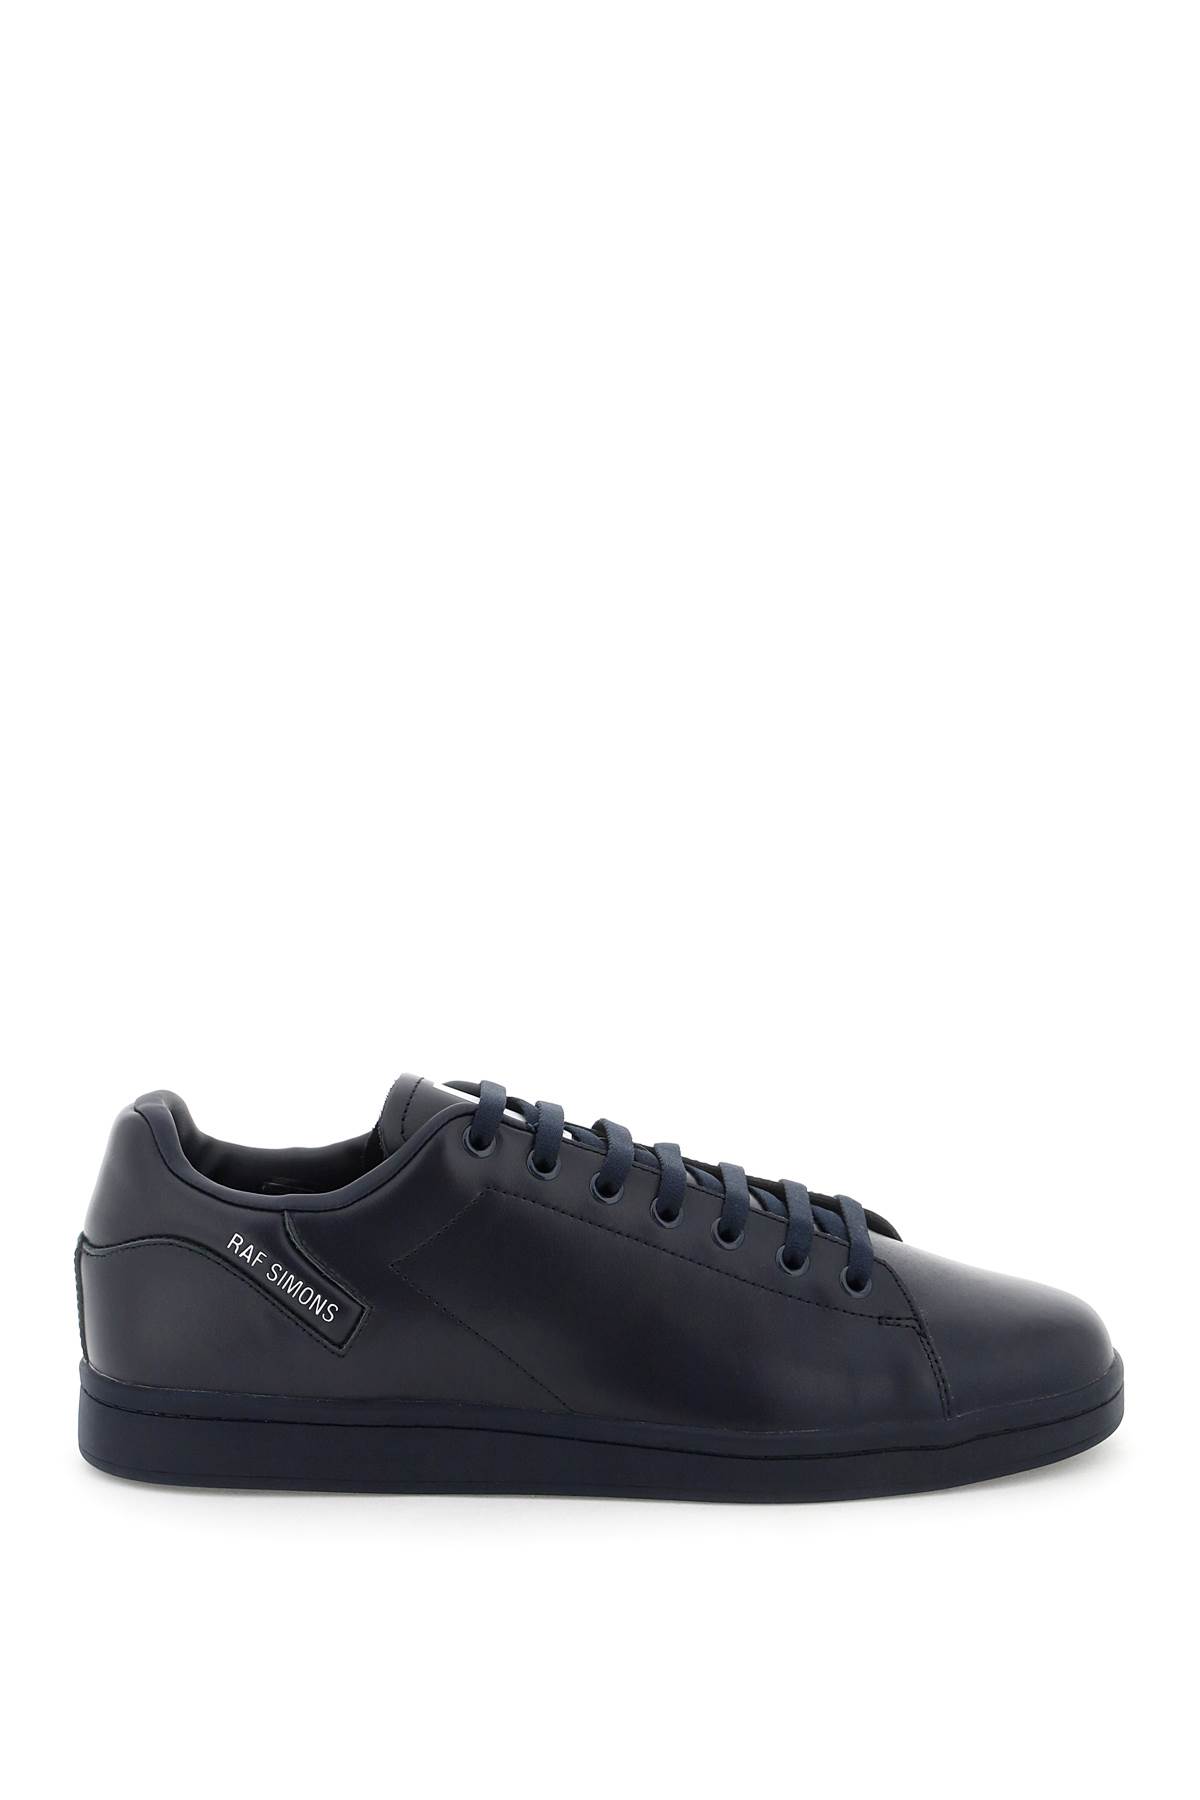 RAF SIMONS ORION LEATHER SNEAKERS